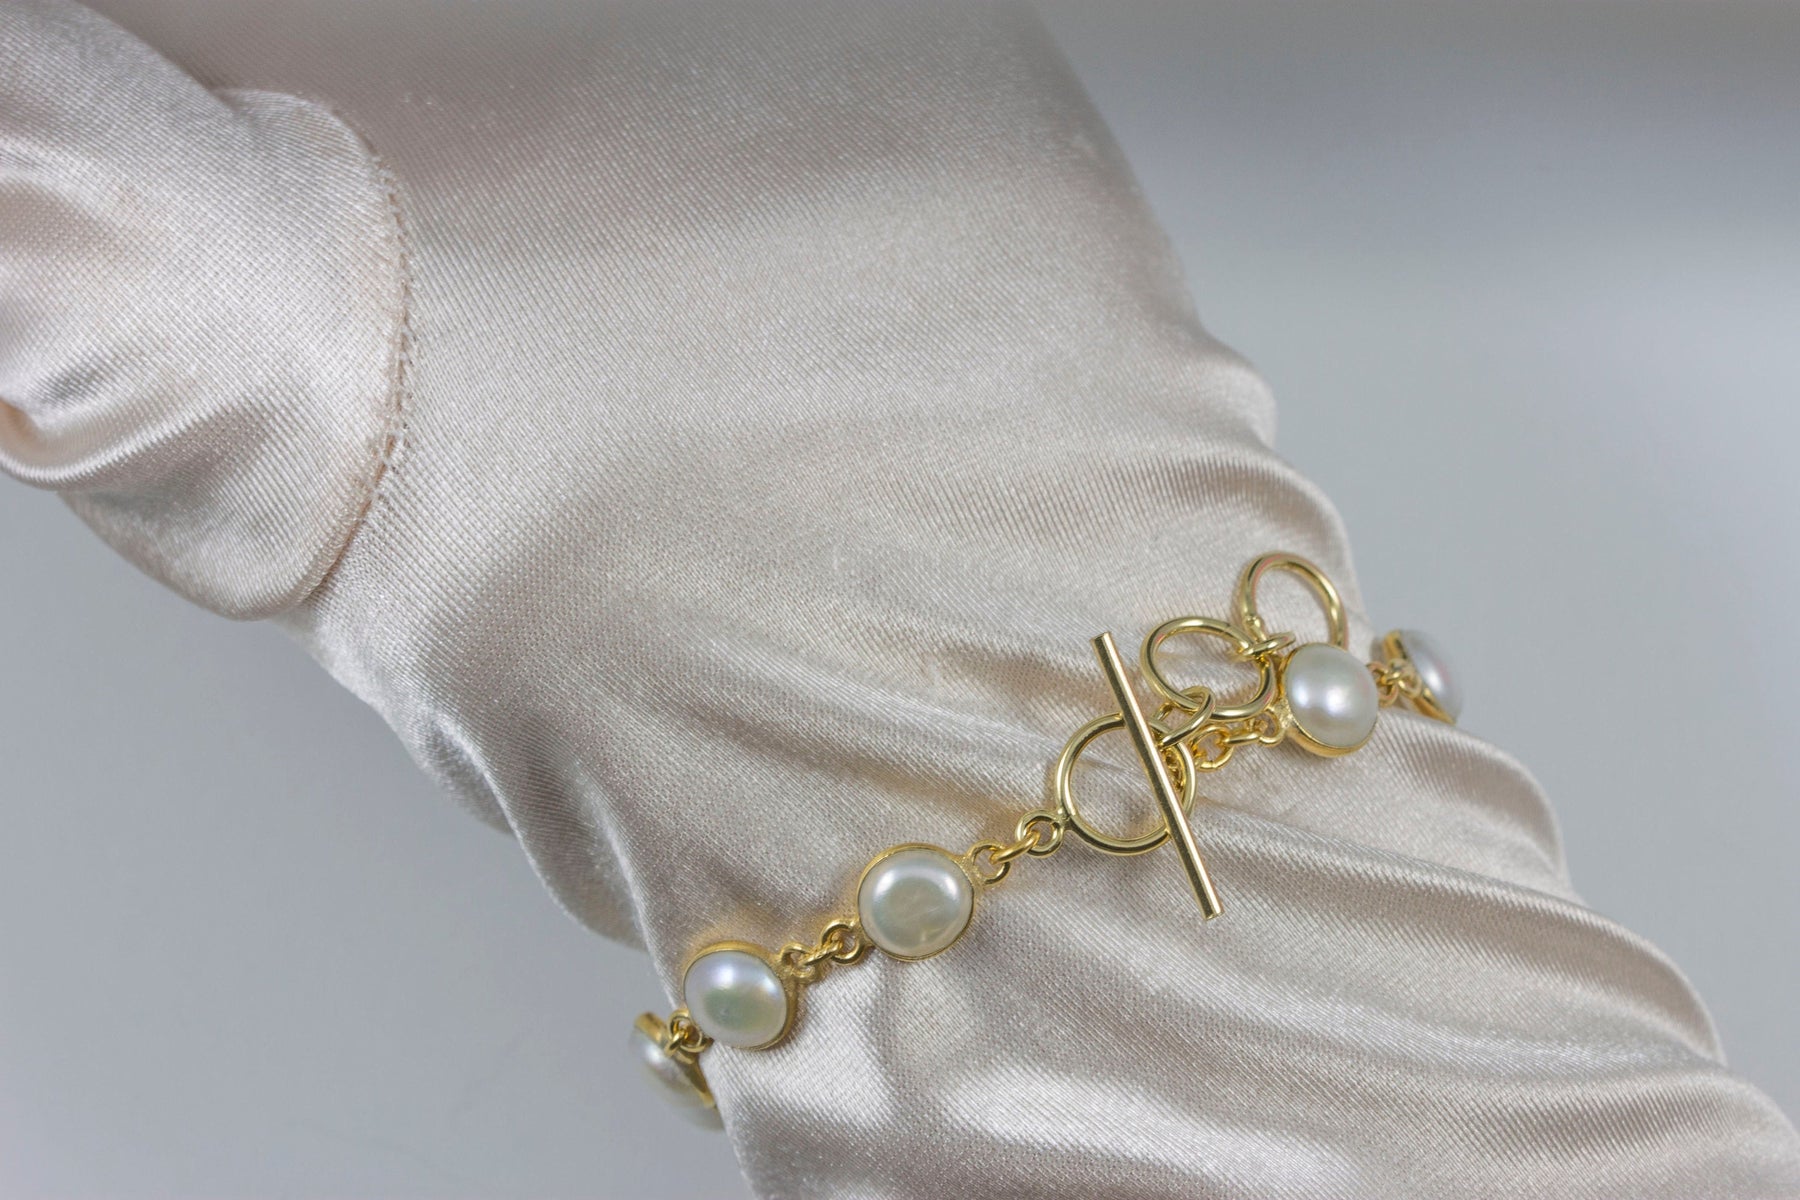 Tiny Pearl Bracelet White Freshwater Pearl Jewelry 5 6 7 8 9 Inch Size Gold  or Sterling Silver Clasp Delicate Dainty Jewelry - Etsy